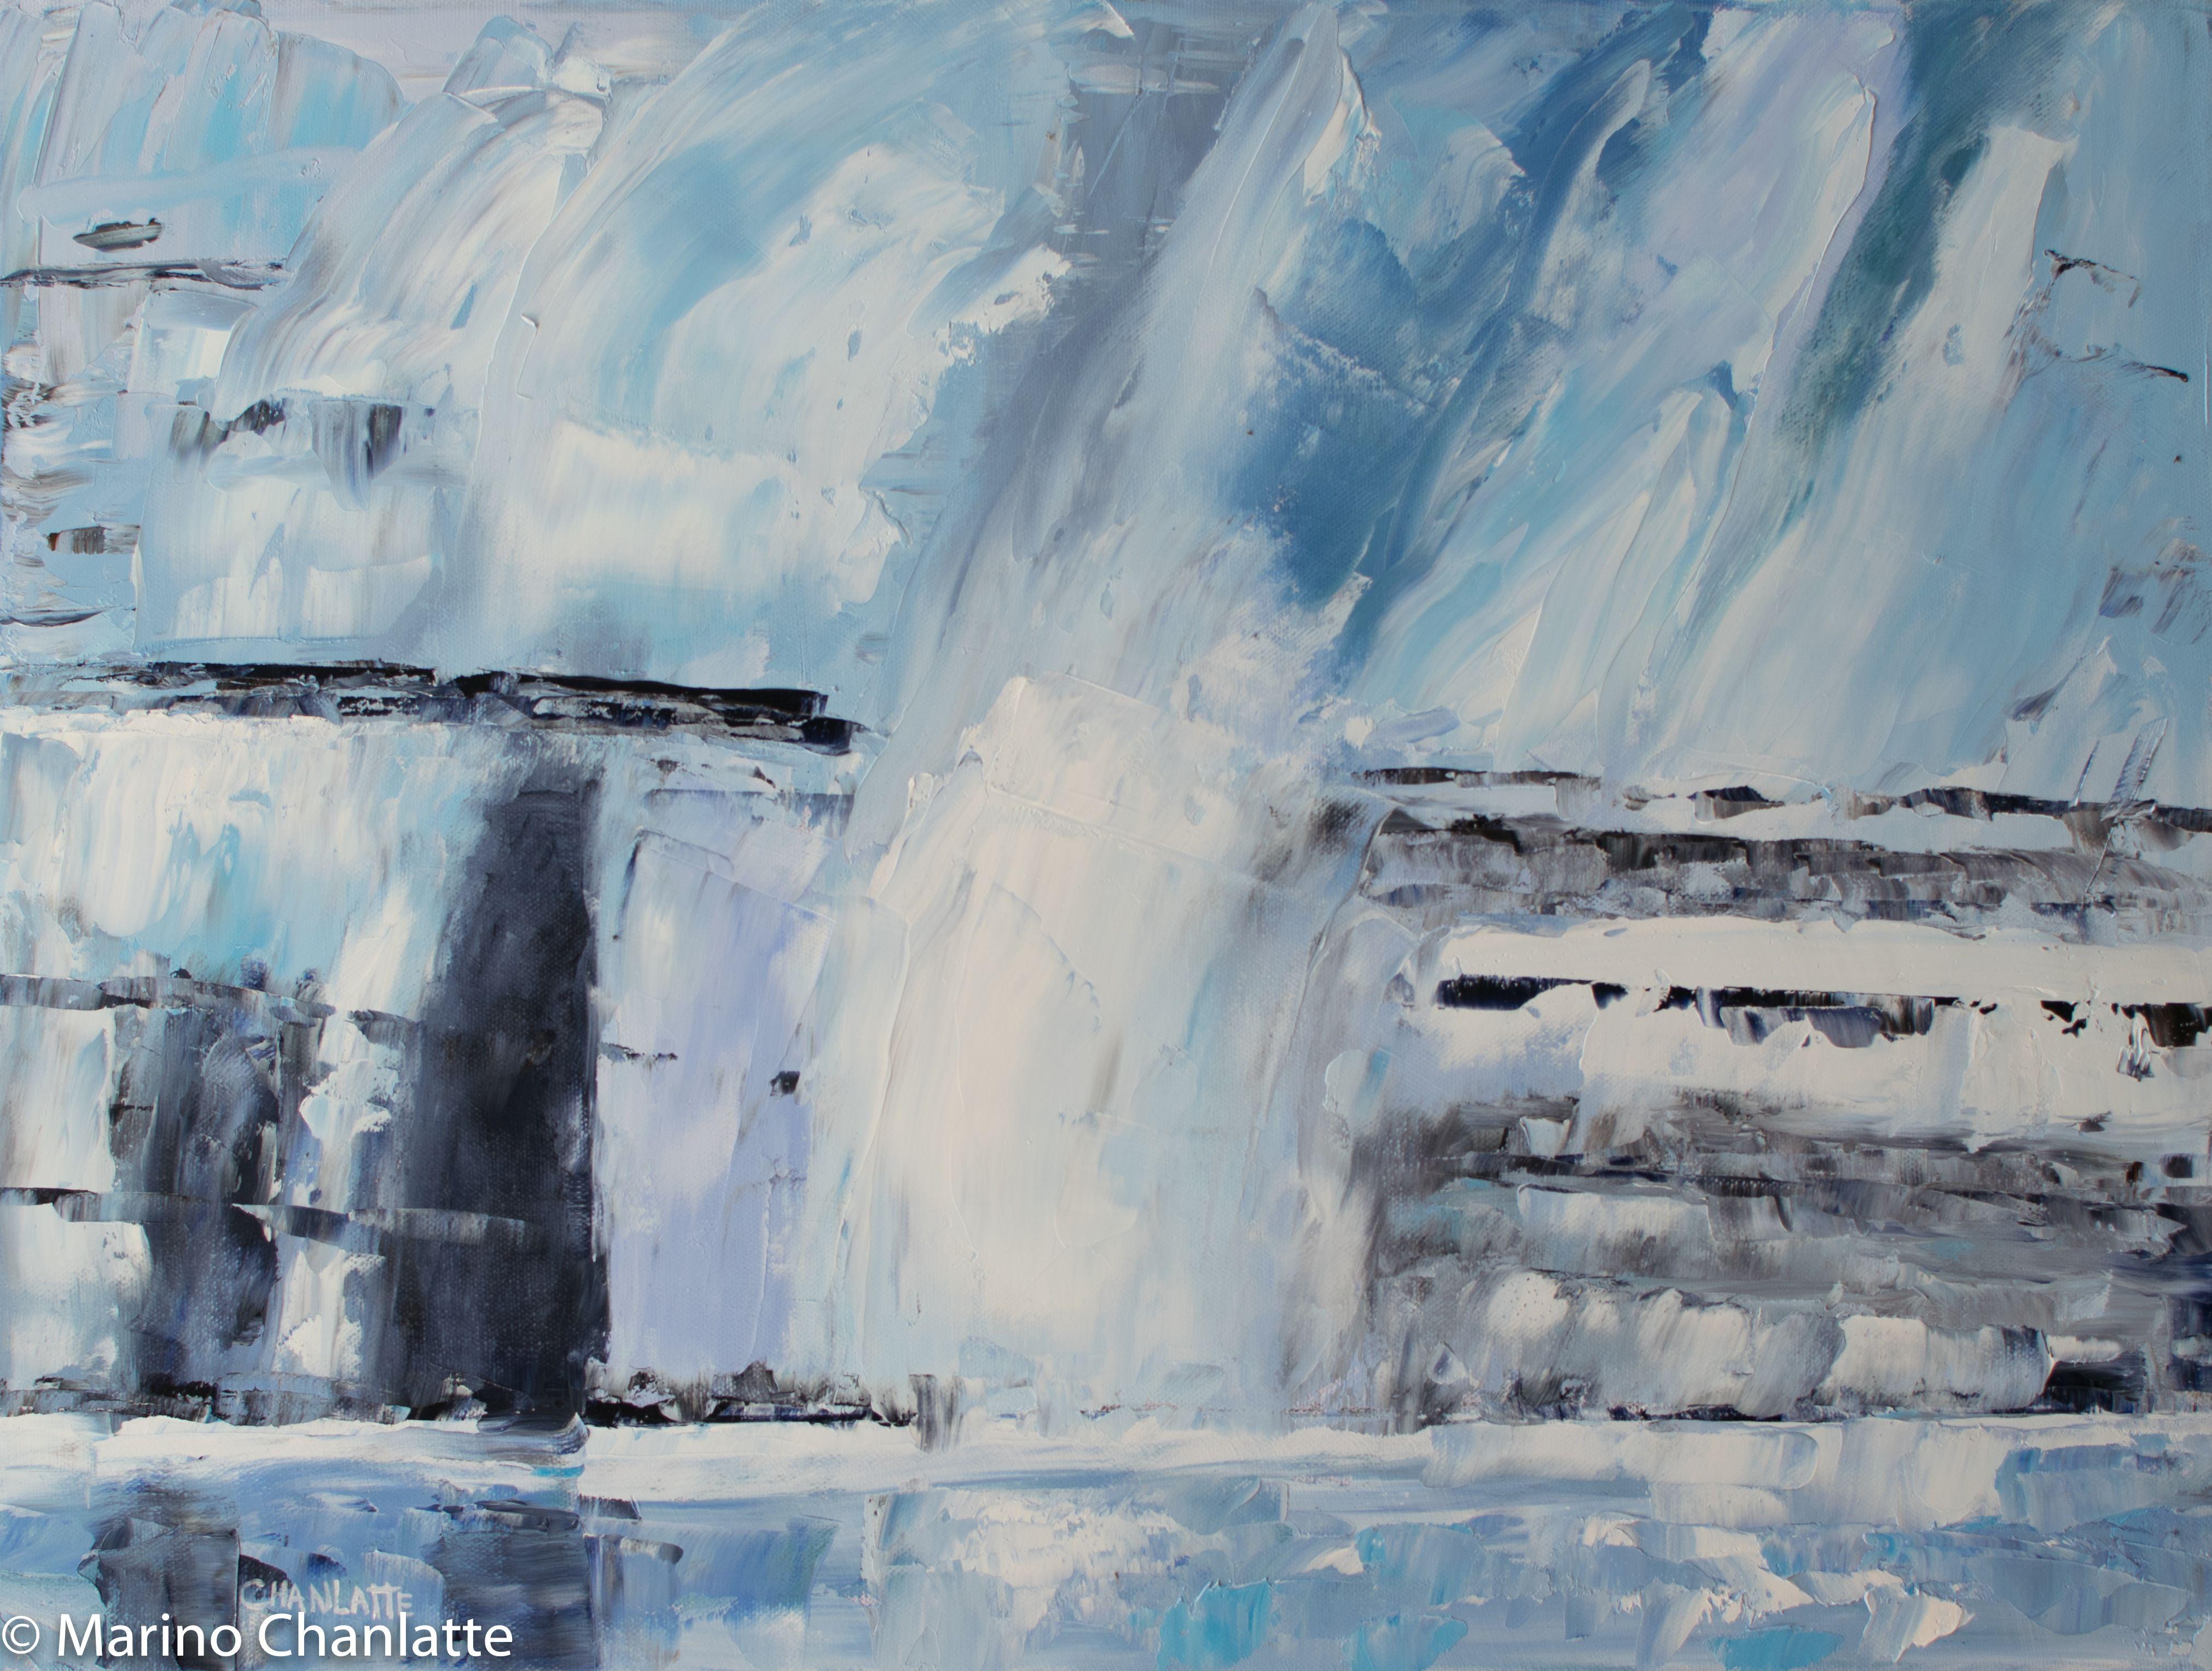 Marino Chanlatte Abstract Painting - Ocean 77, Ocean Ice Melting, Painting, Oil on Canvas